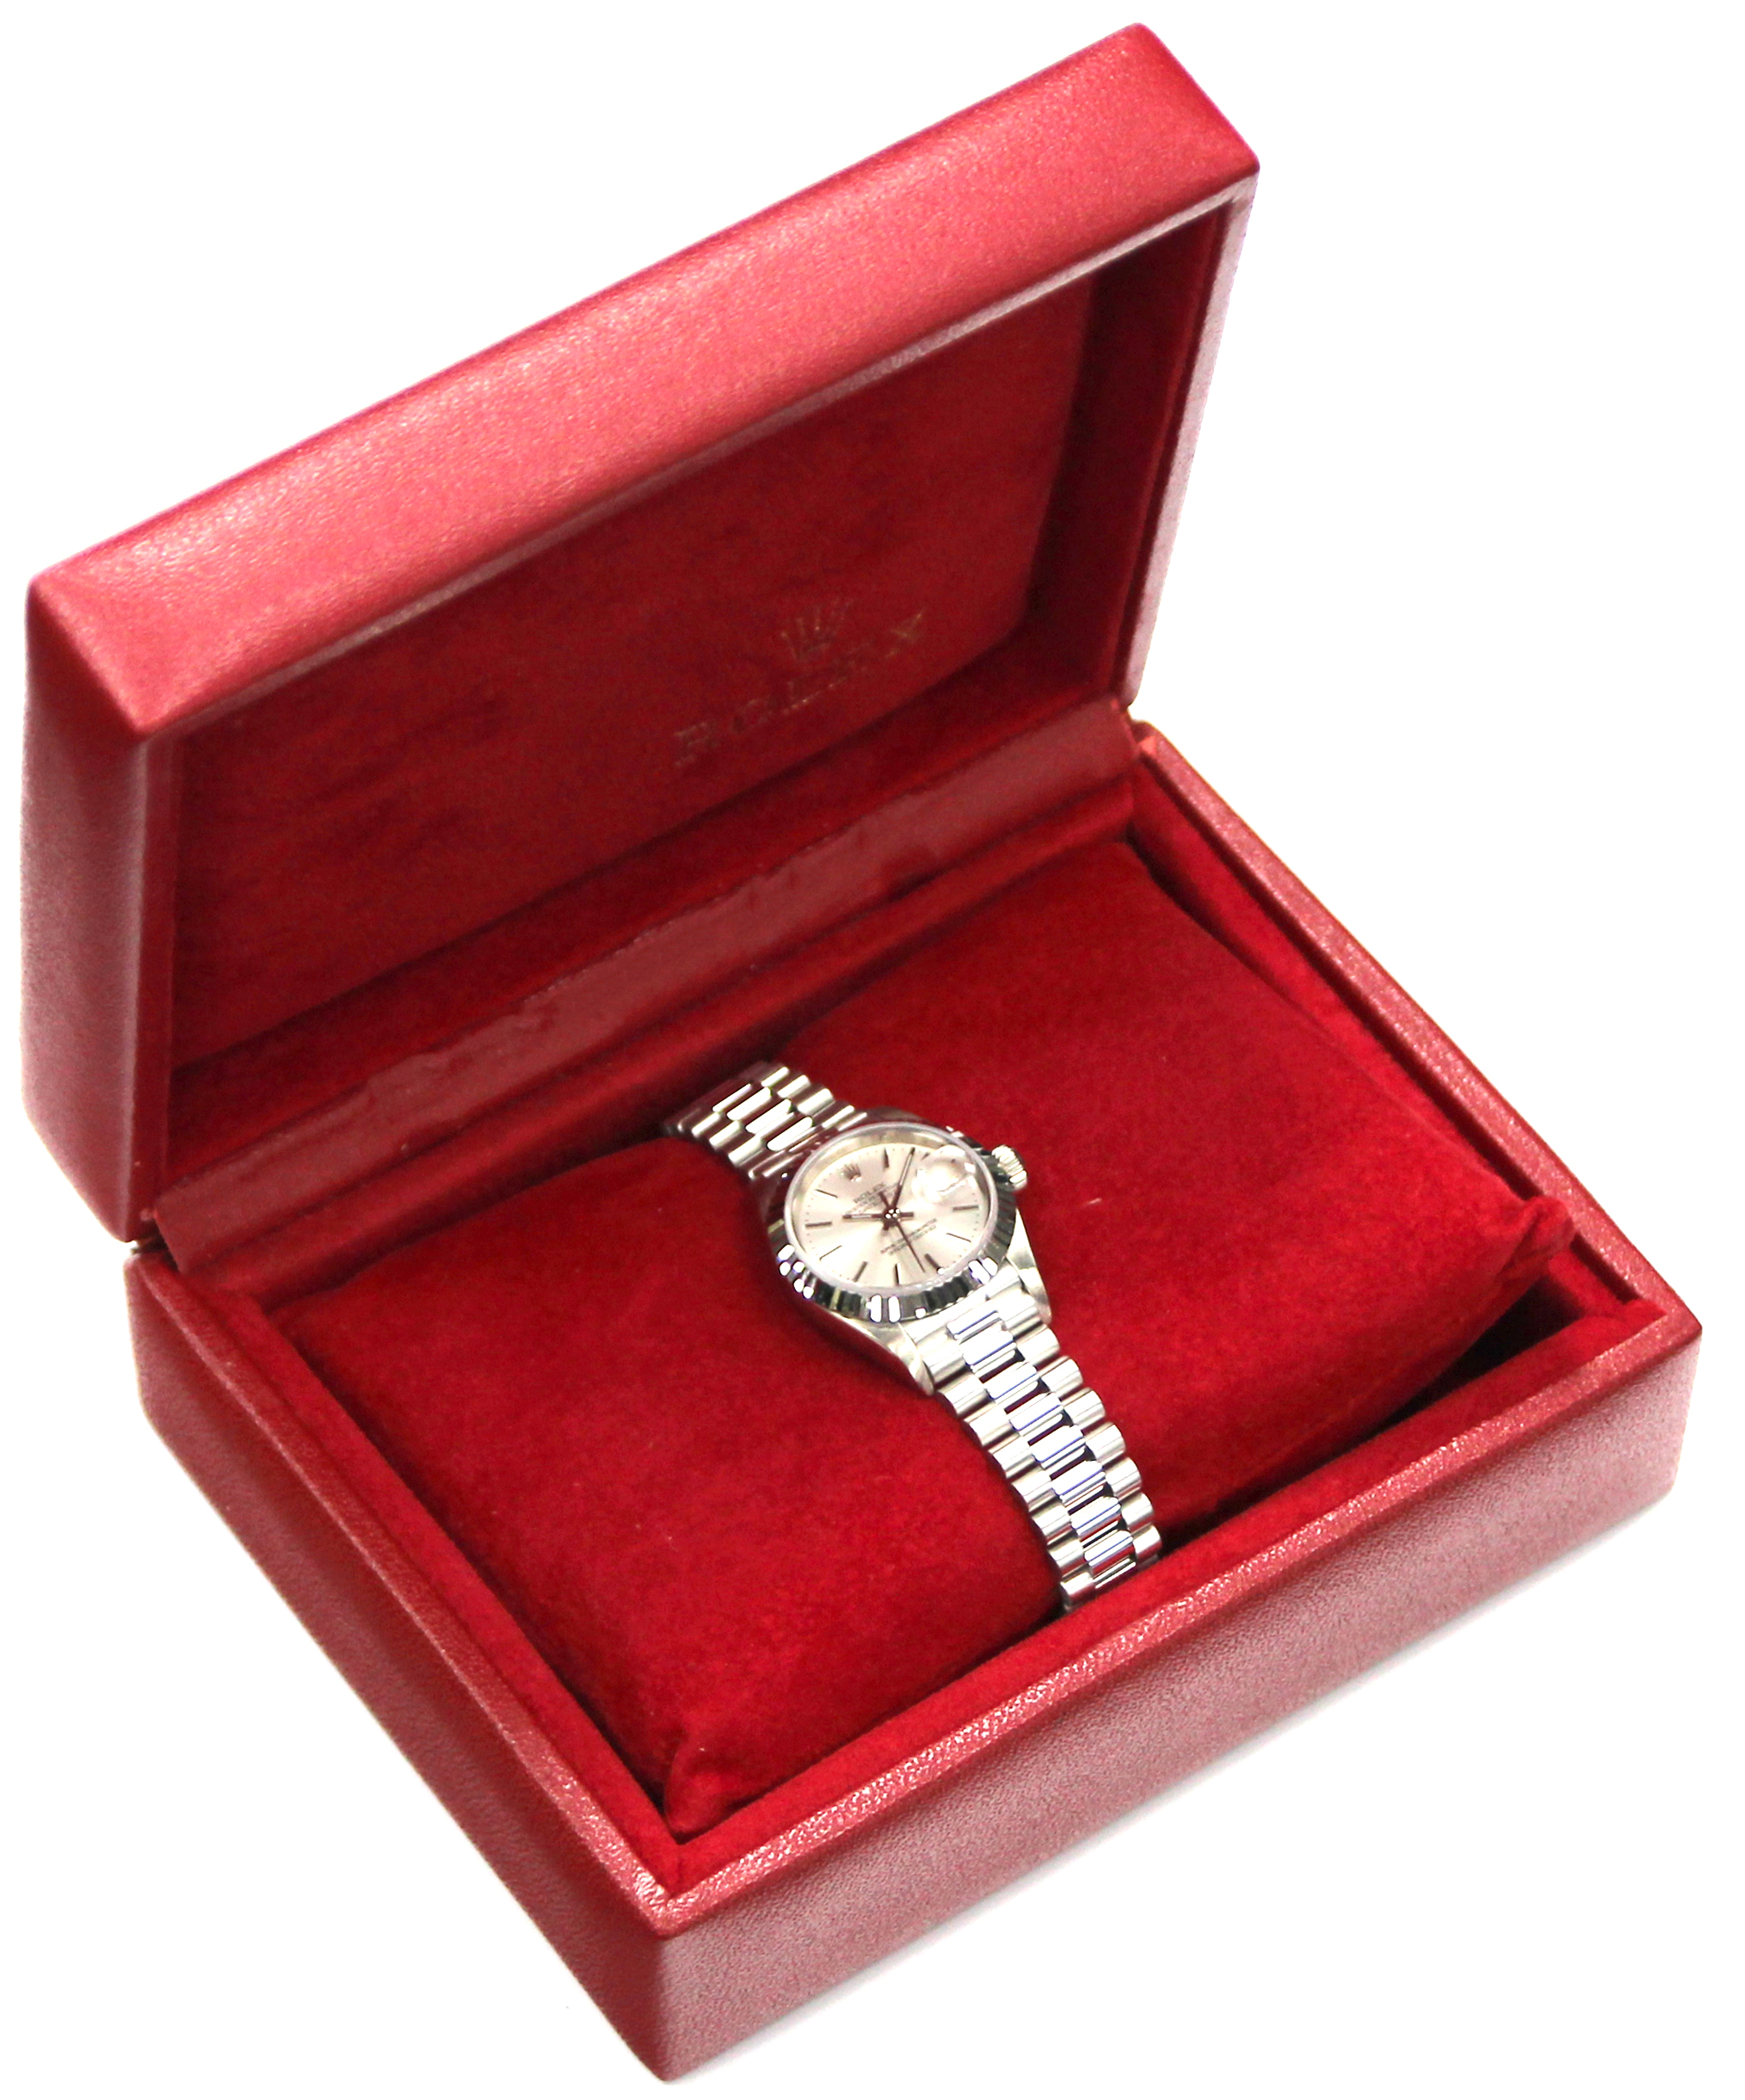 Rolex Datejust lady's wristwatch 79179 in white gold case, silver dial, - Image 8 of 9